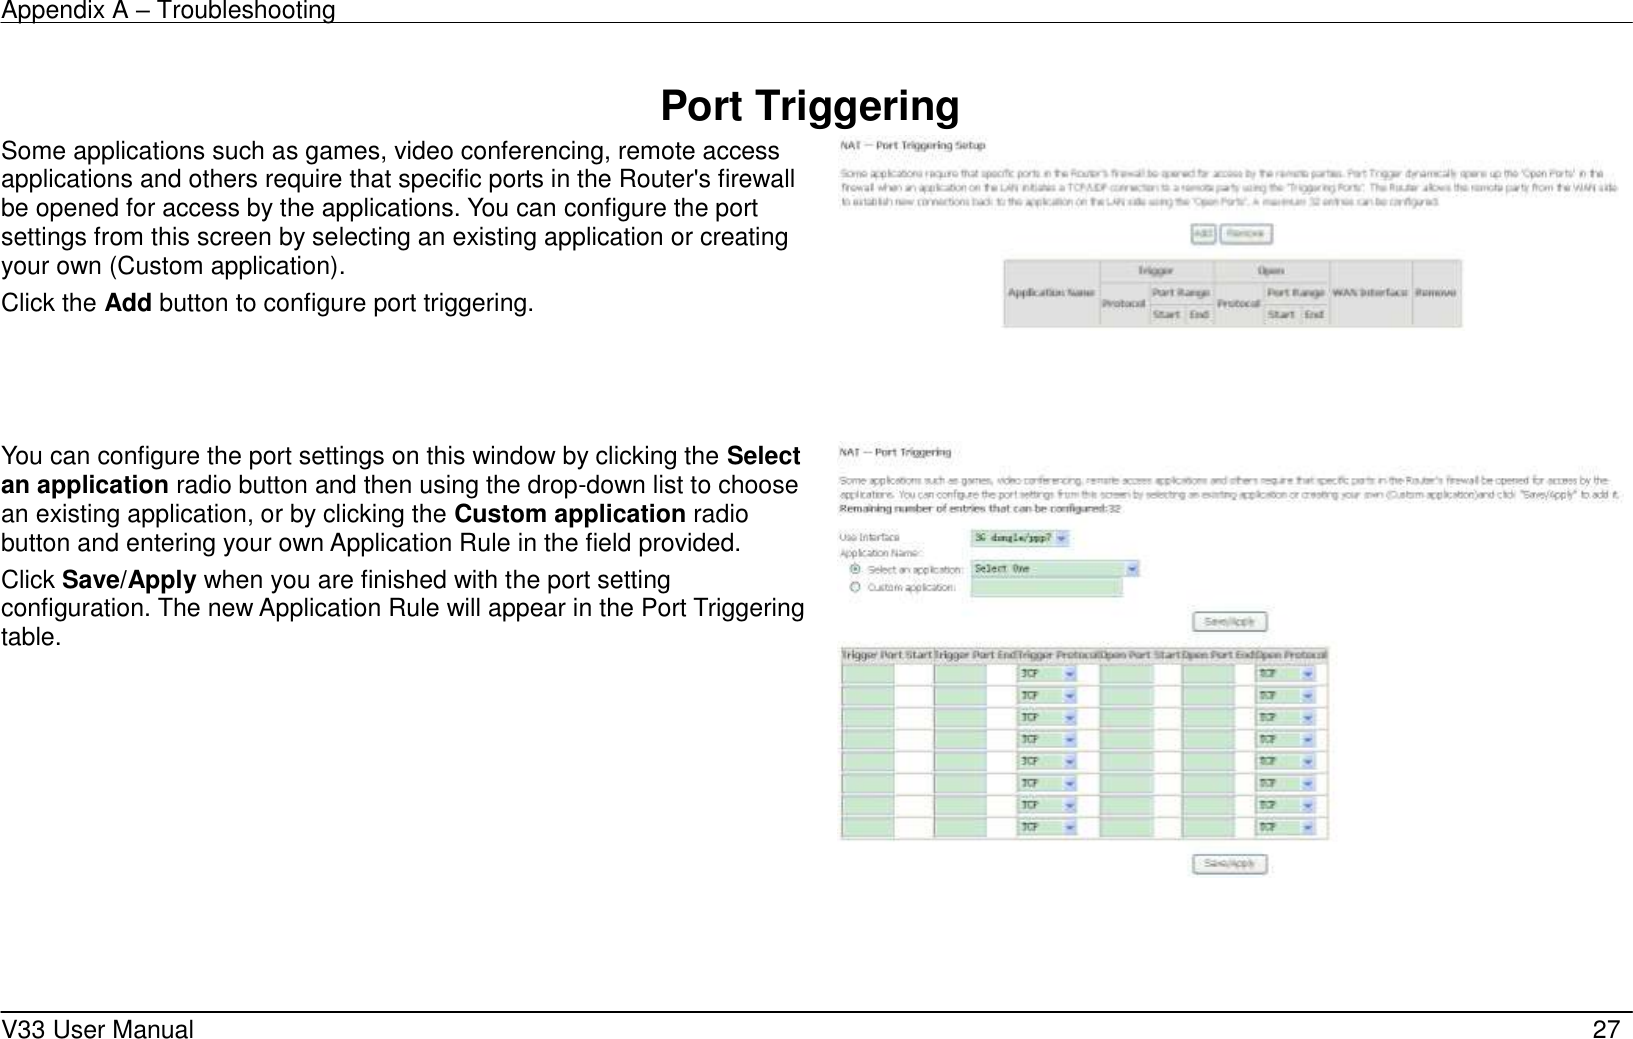 Appendix A – Troubleshooting    V33 User Manual   27  Port Triggering Some applications such as games, video conferencing, remote access applications and others require that specific ports in the Router&apos;s firewall be opened for access by the applications. You can configure the port settings from this screen by selecting an existing application or creating your own (Custom application). Click the Add button to configure port triggering.    You can configure the port settings on this window by clicking the Select an application radio button and then using the drop-down list to choose an existing application, or by clicking the Custom application radio button and entering your own Application Rule in the field provided.   Click Save/Apply when you are finished with the port setting configuration. The new Application Rule will appear in the Port Triggering table.     